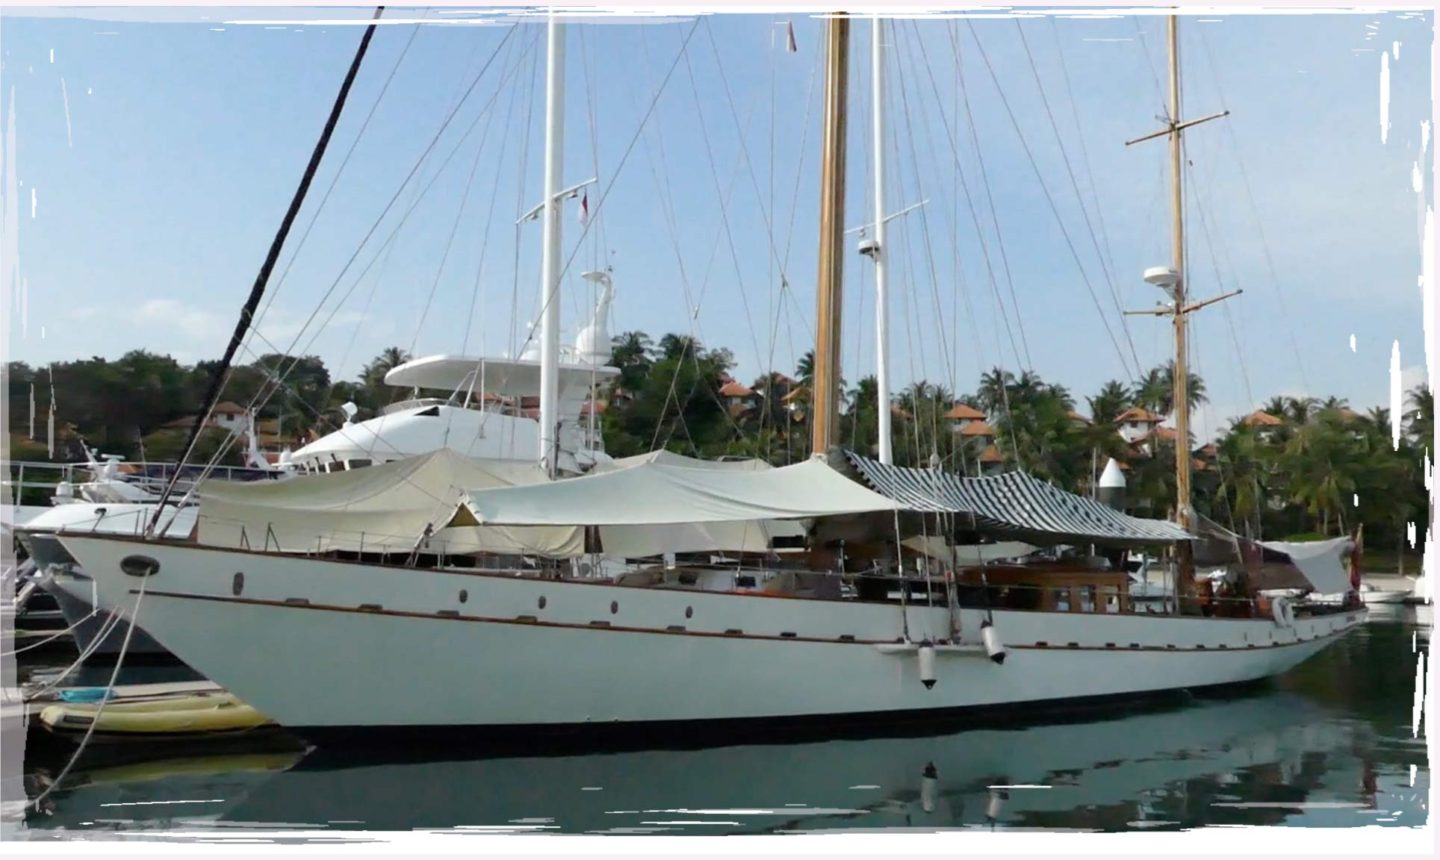 Batam Airbnb – RONA Sailing Yacht Perfect 3 Day Stay